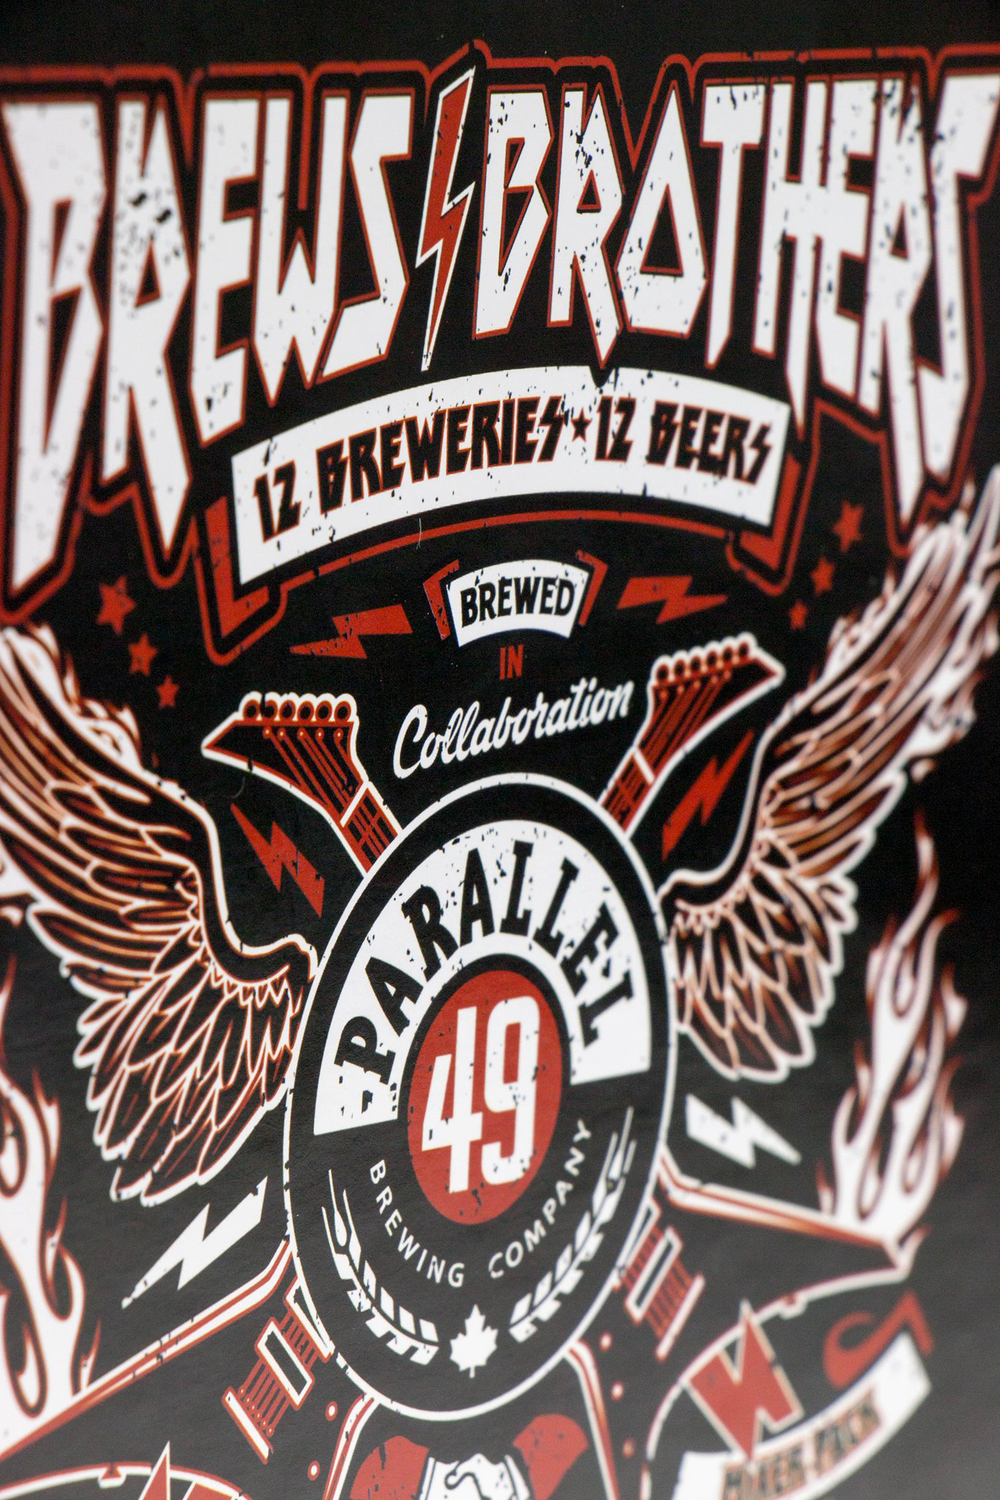 Steve Kitchen, Combination13 – Parallel 49 Brewing Brews Brothers Volume 2